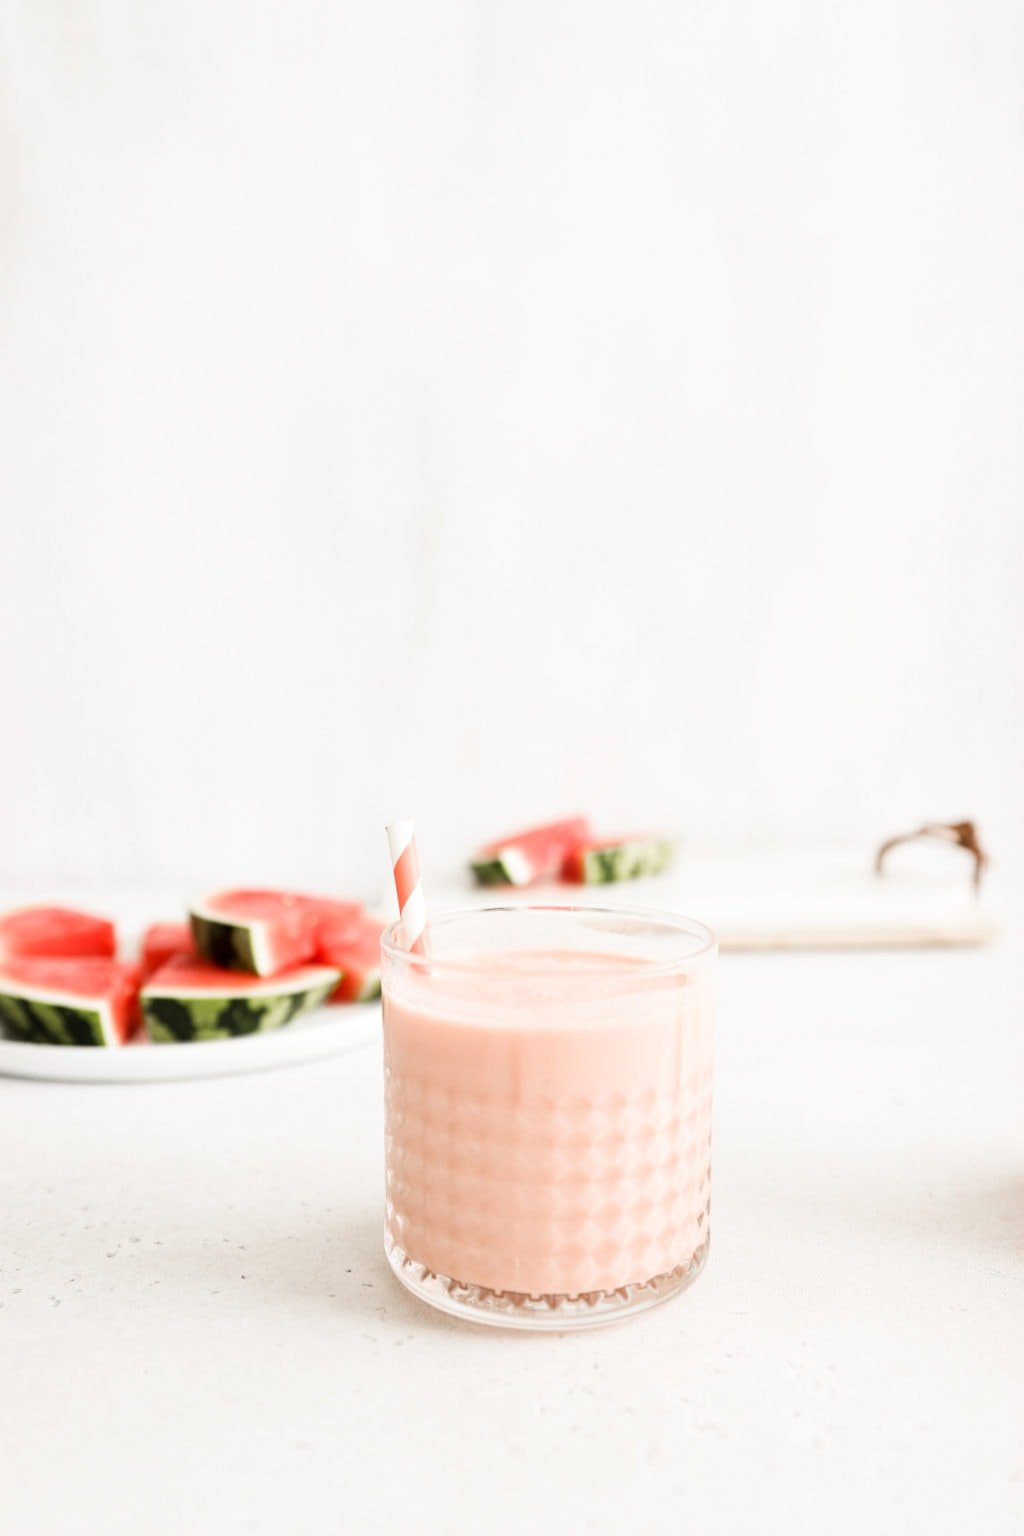 A watermelon banana smoothie in a glass cup with a striped pink and white straw. The smoothie is on a neutral surface with slices of watermelon faded in the background. Ingredients include: watermelon, banana, Greek yogurt, lime.